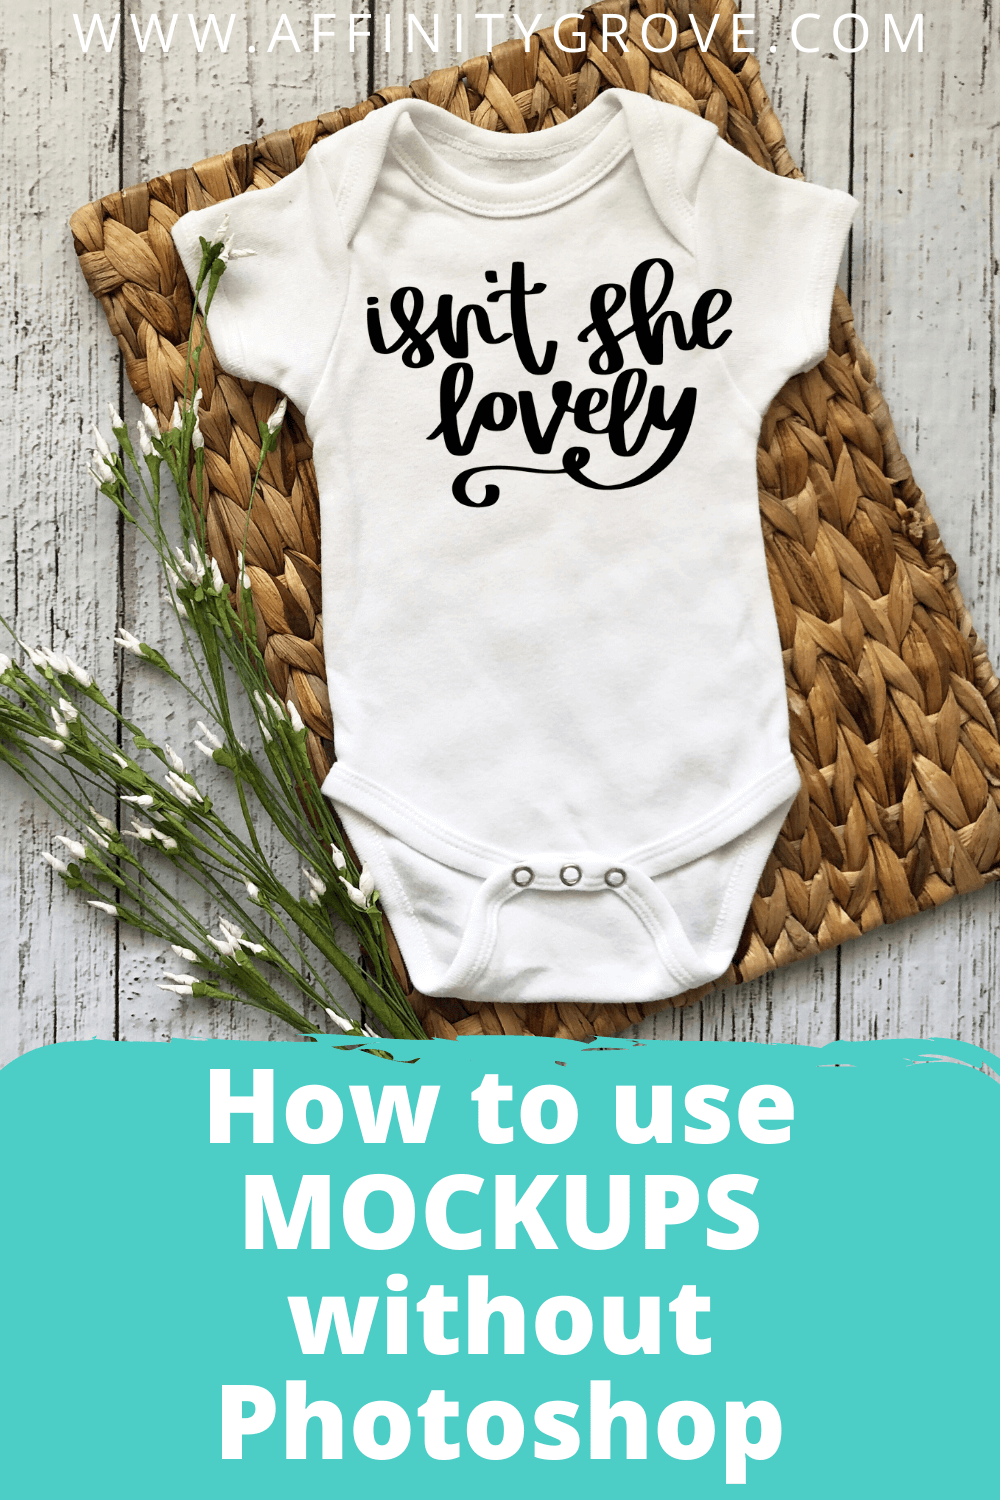 Download How to Edit Mockups Without Photoshop • Affinity Grove